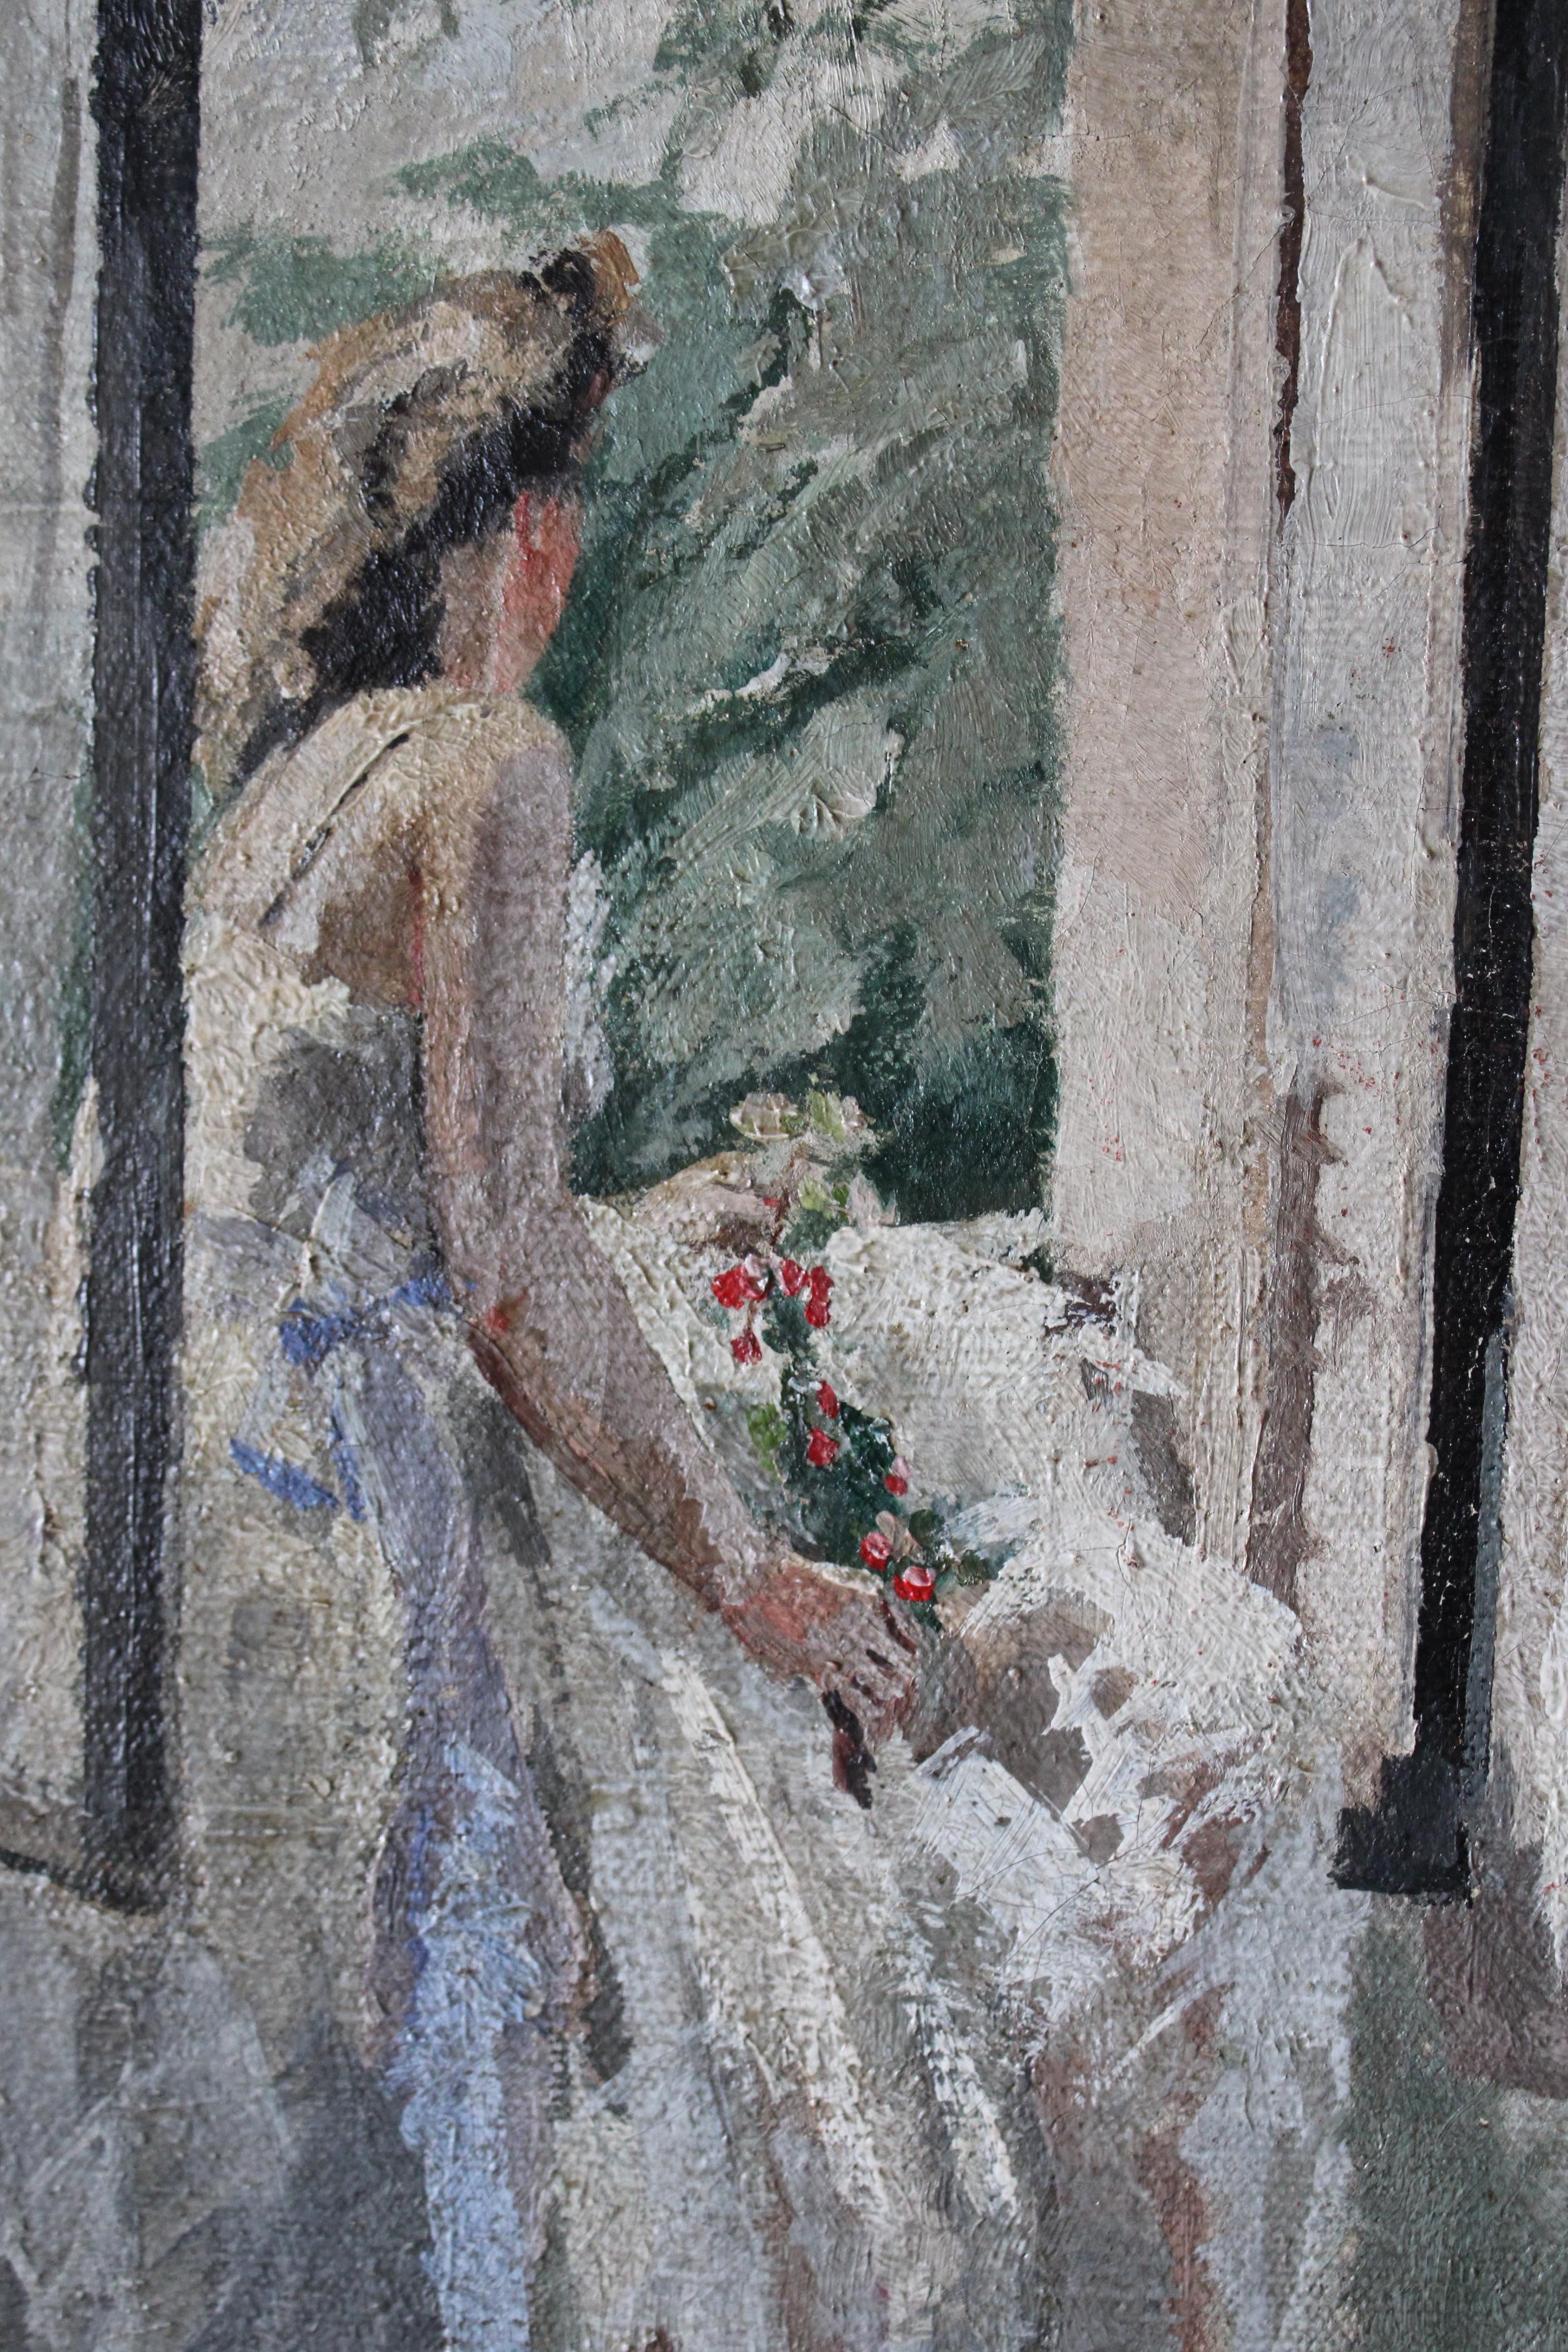 Vintage post-impressionist painting of a ballerina, figurative interior scene - Post-Impressionist Painting by Reine Virely Calmez